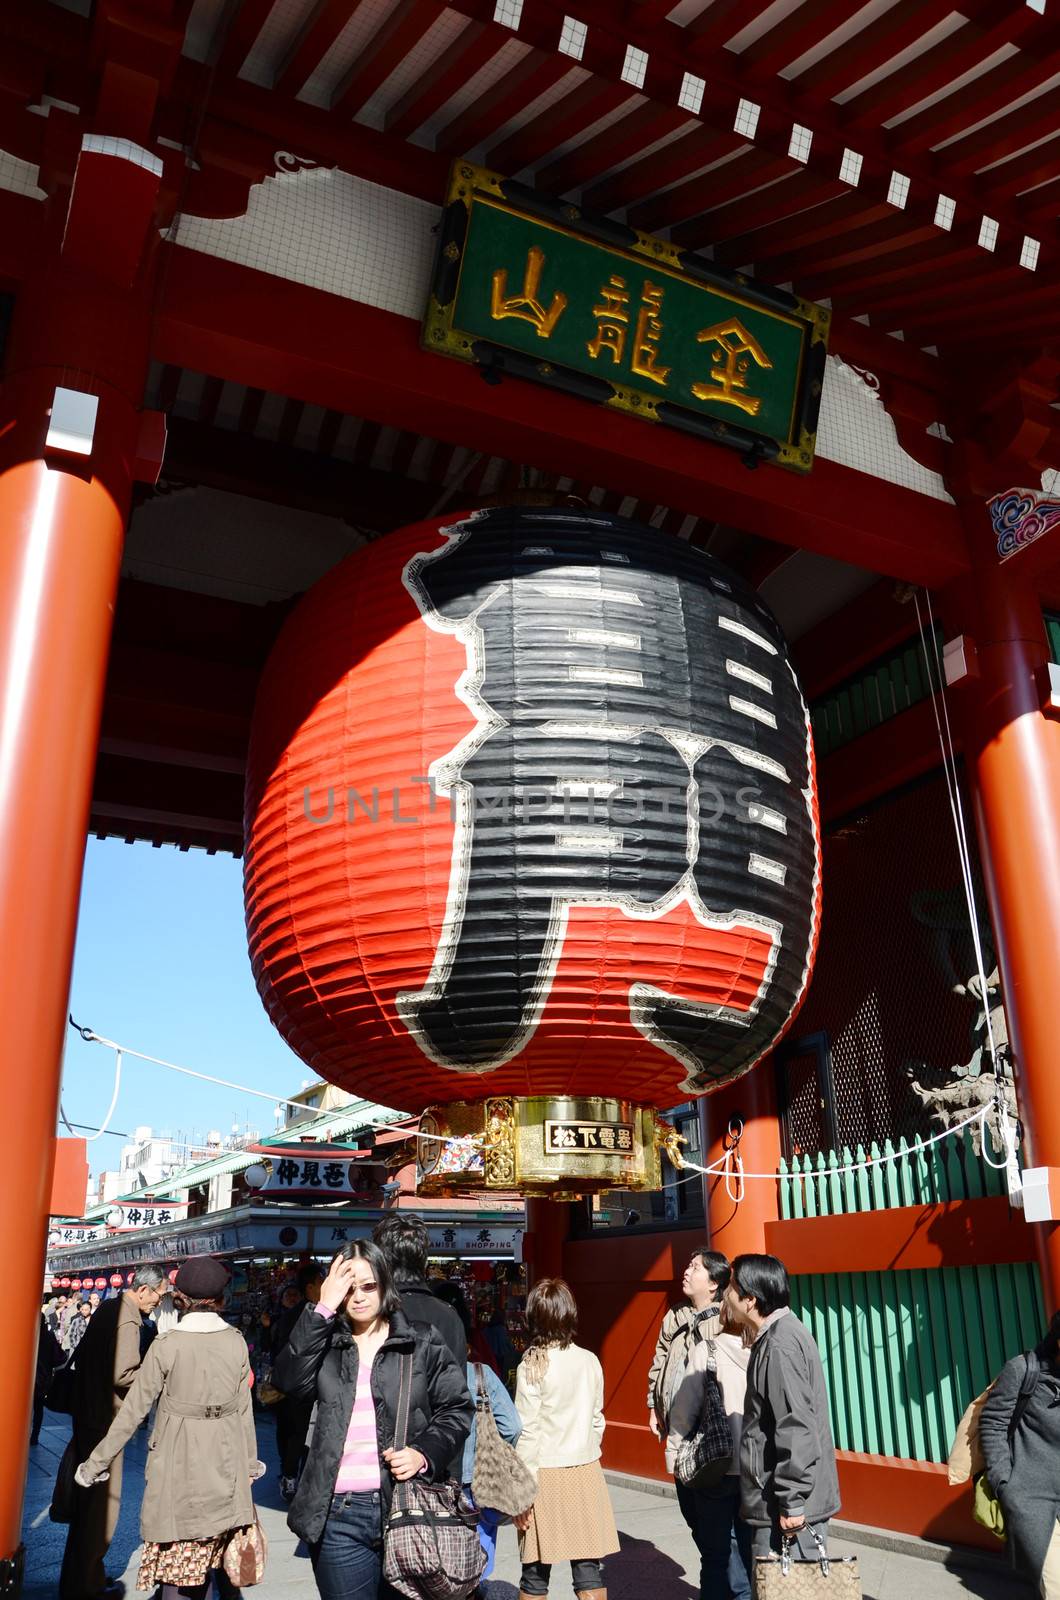 TOKYO, JAPAN - NOV 21: Imposing Buddhist structure features a massive paper lantern painted by siraanamwong